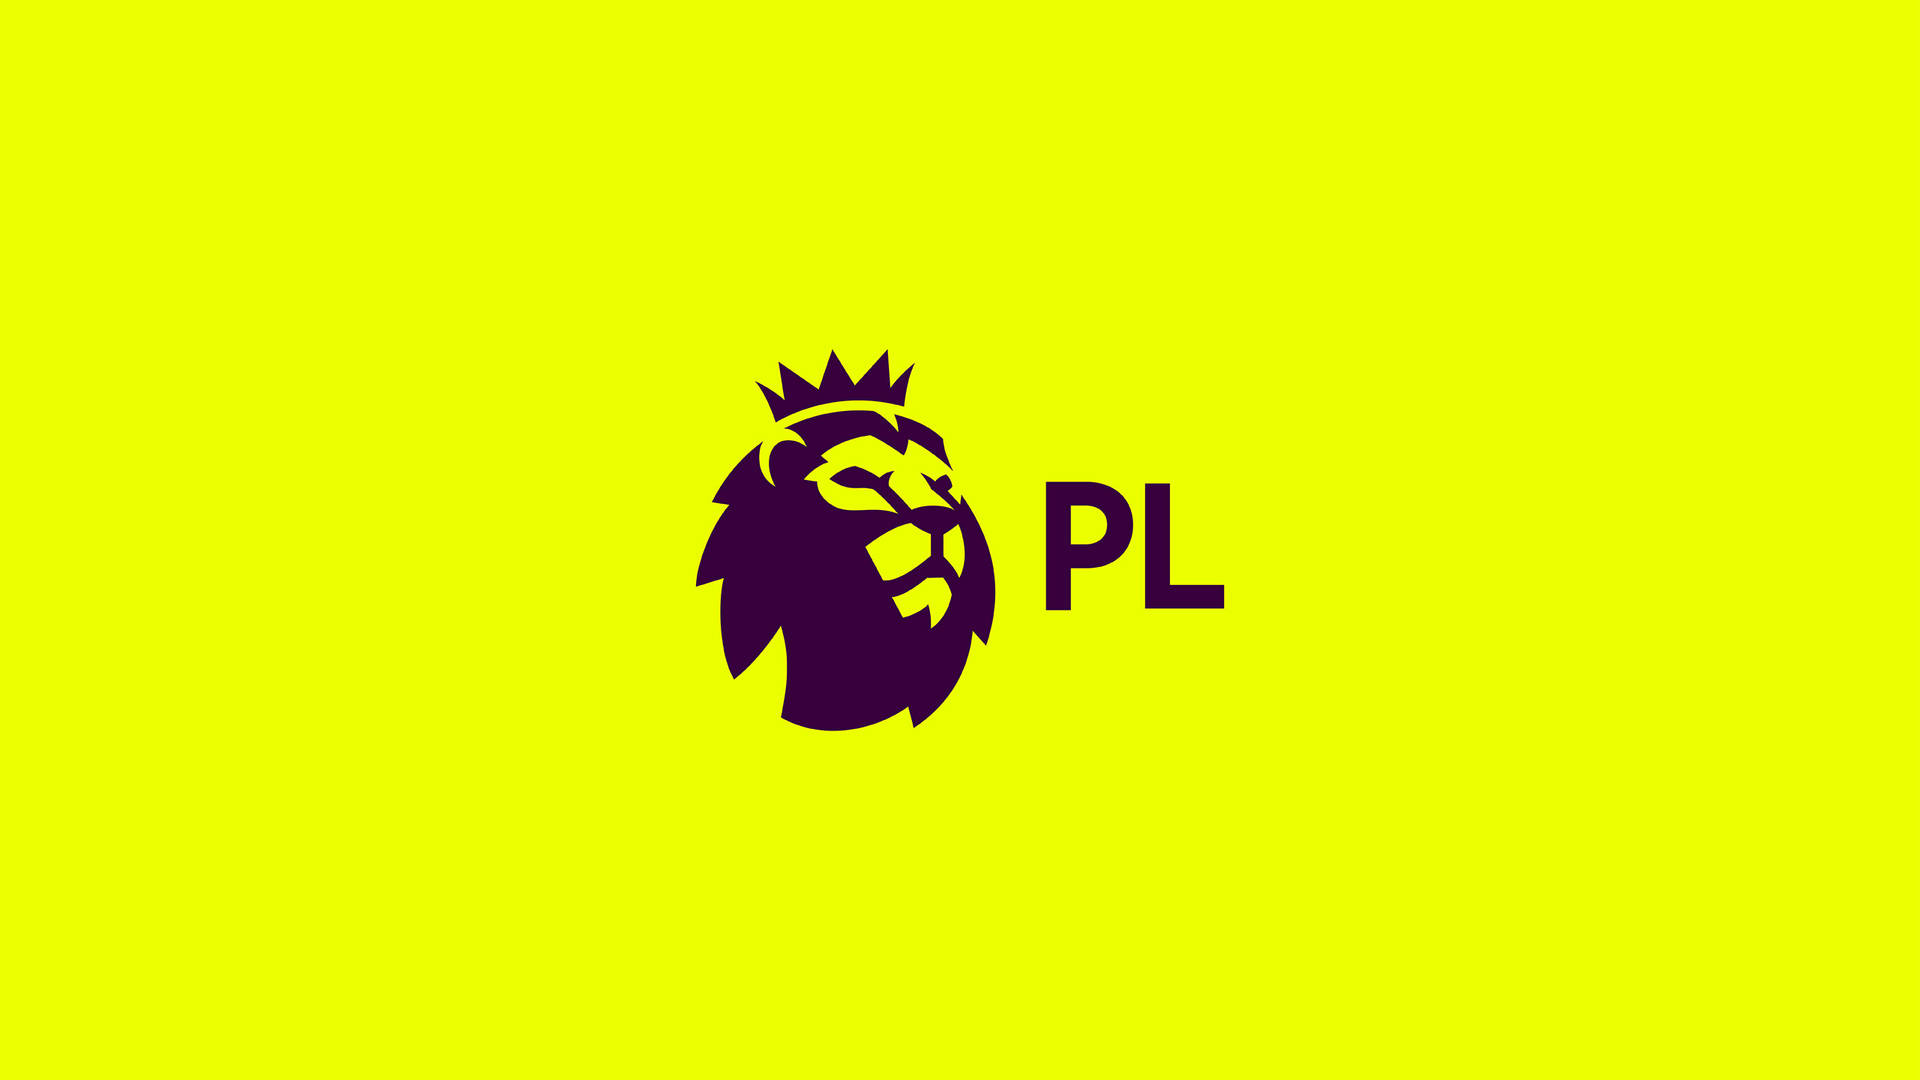 Premier League In Yellow Background